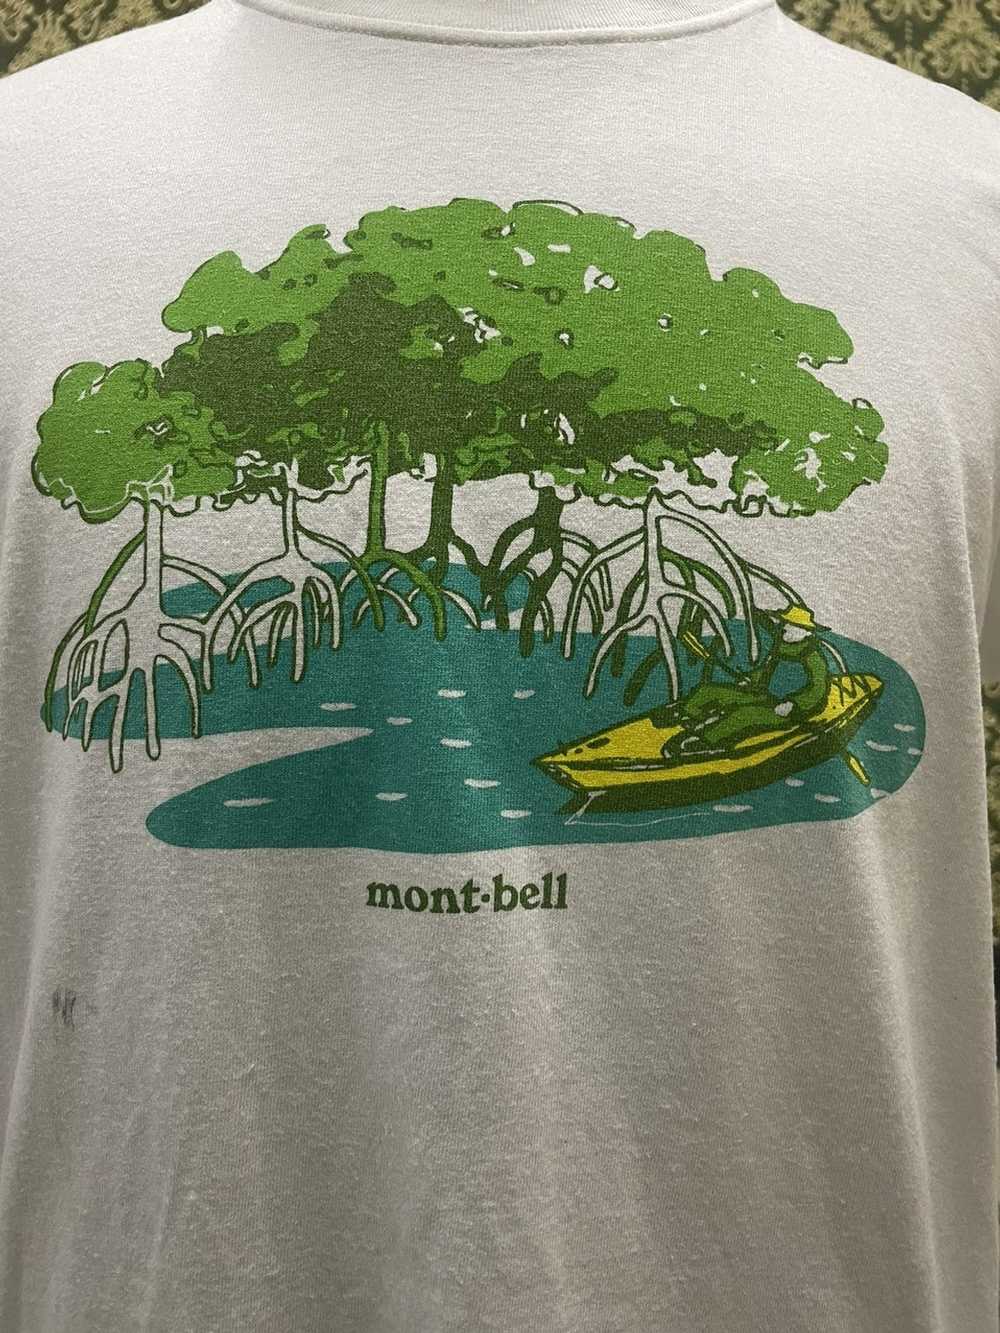 Montbell Mont-Bell T shirt - image 5